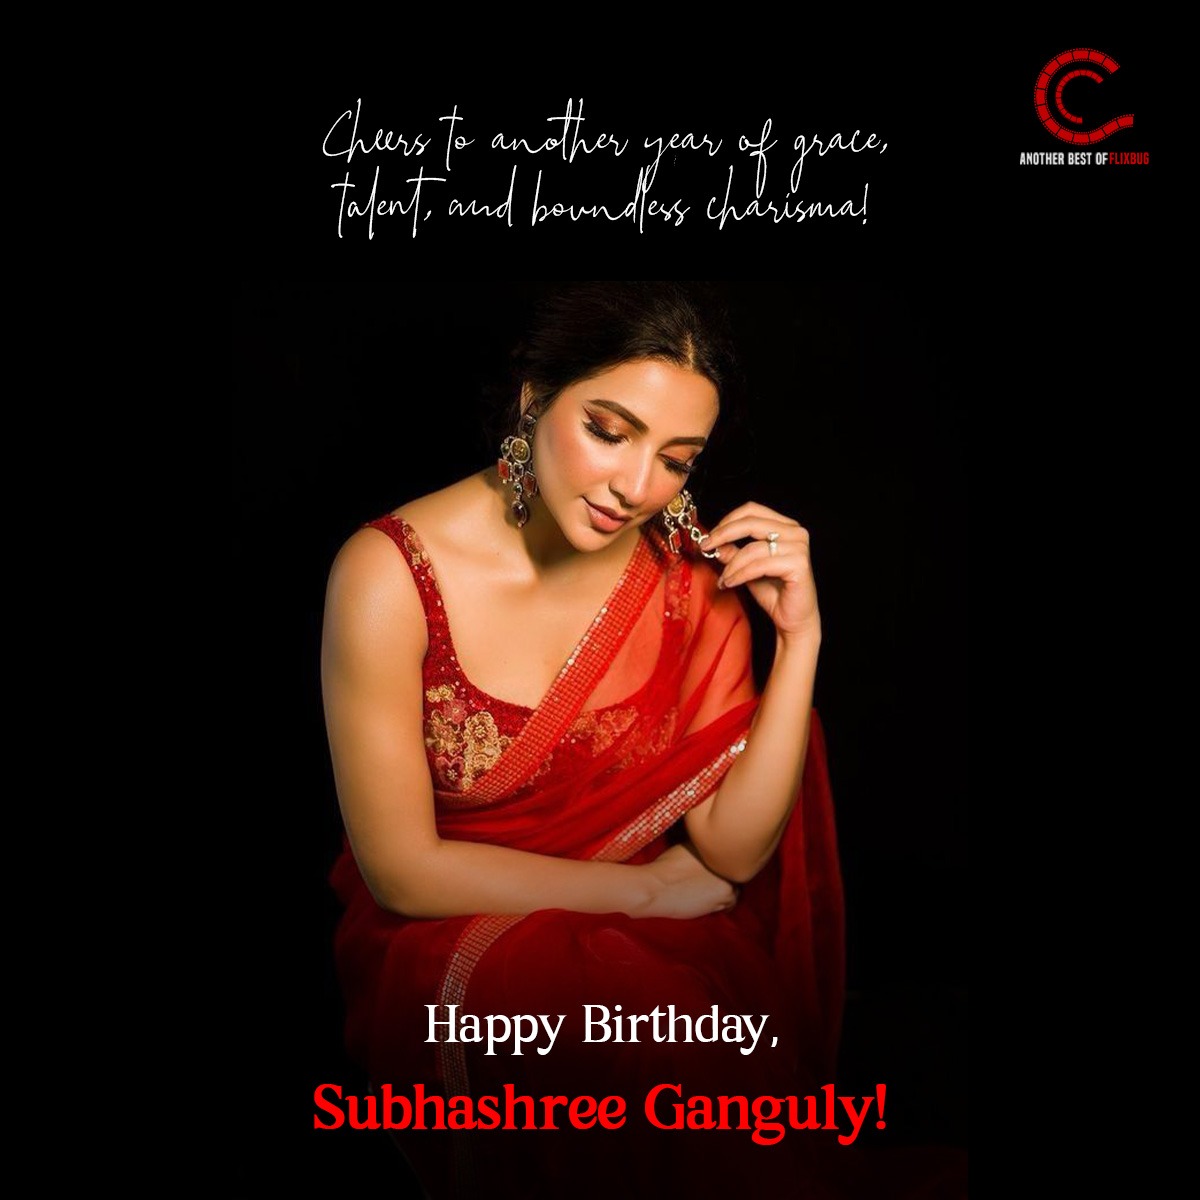 Wishing a very happy birthday to the gorgeous and beautiful @subhashreeganguly_real from @ciineemedia!
.
.
#HappyBirthdaySubhashree #subhashreeganguly #subhashreeganguly_real #subhashree #hbdsubhashreeganguly #hbdsubhashree #Ciinee